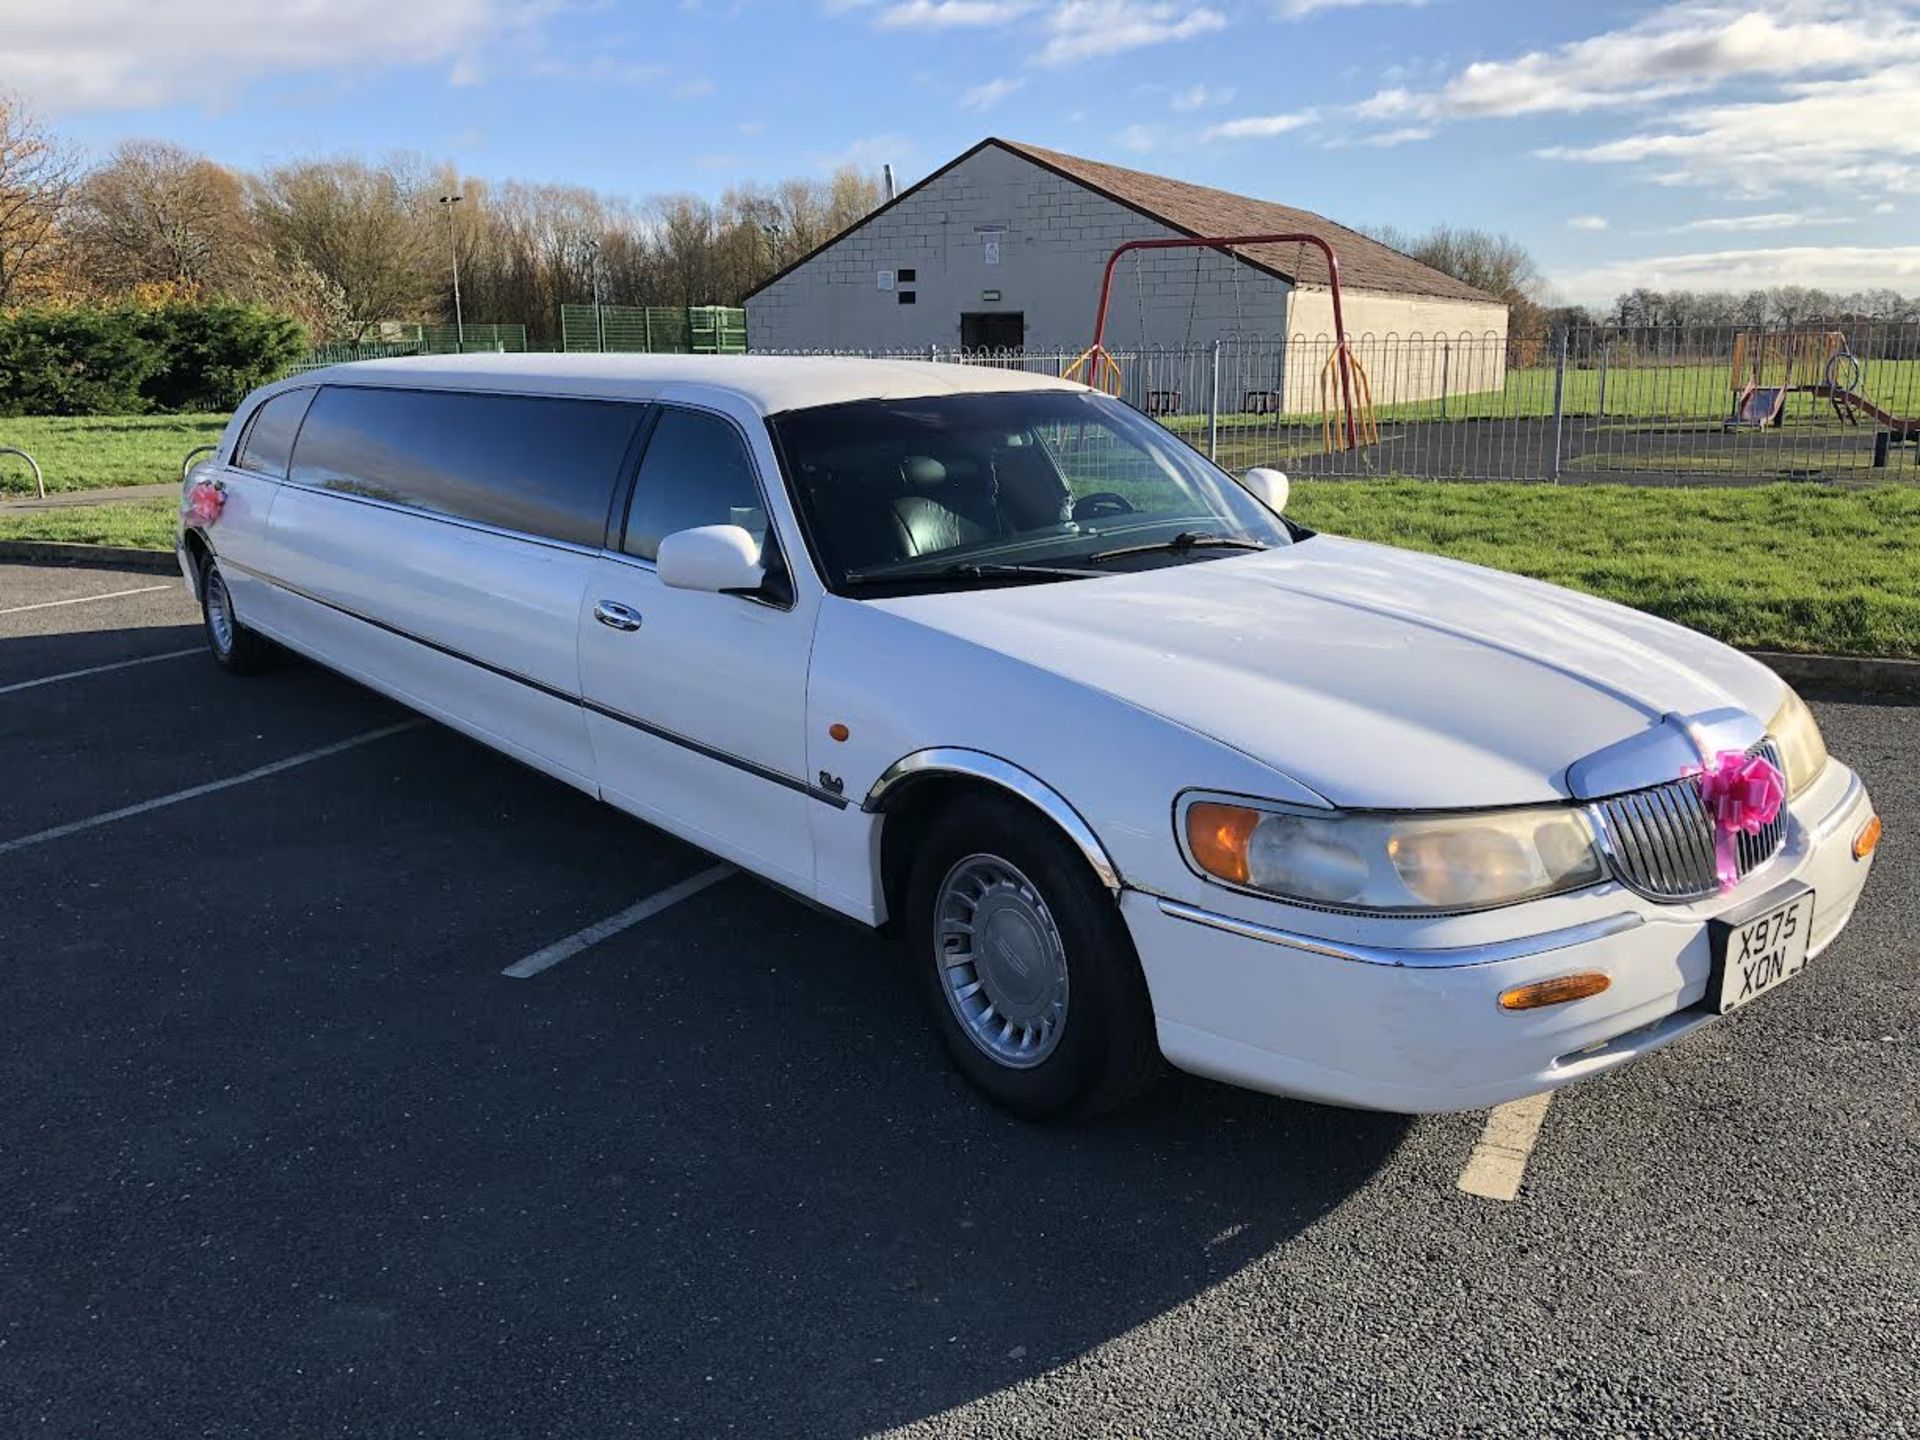 2001 LINCOLN TOWN CAR AUTO WHITE 10 SEATER LIMOUSINE WEDDING CAR *NO VAT* - Image 5 of 17